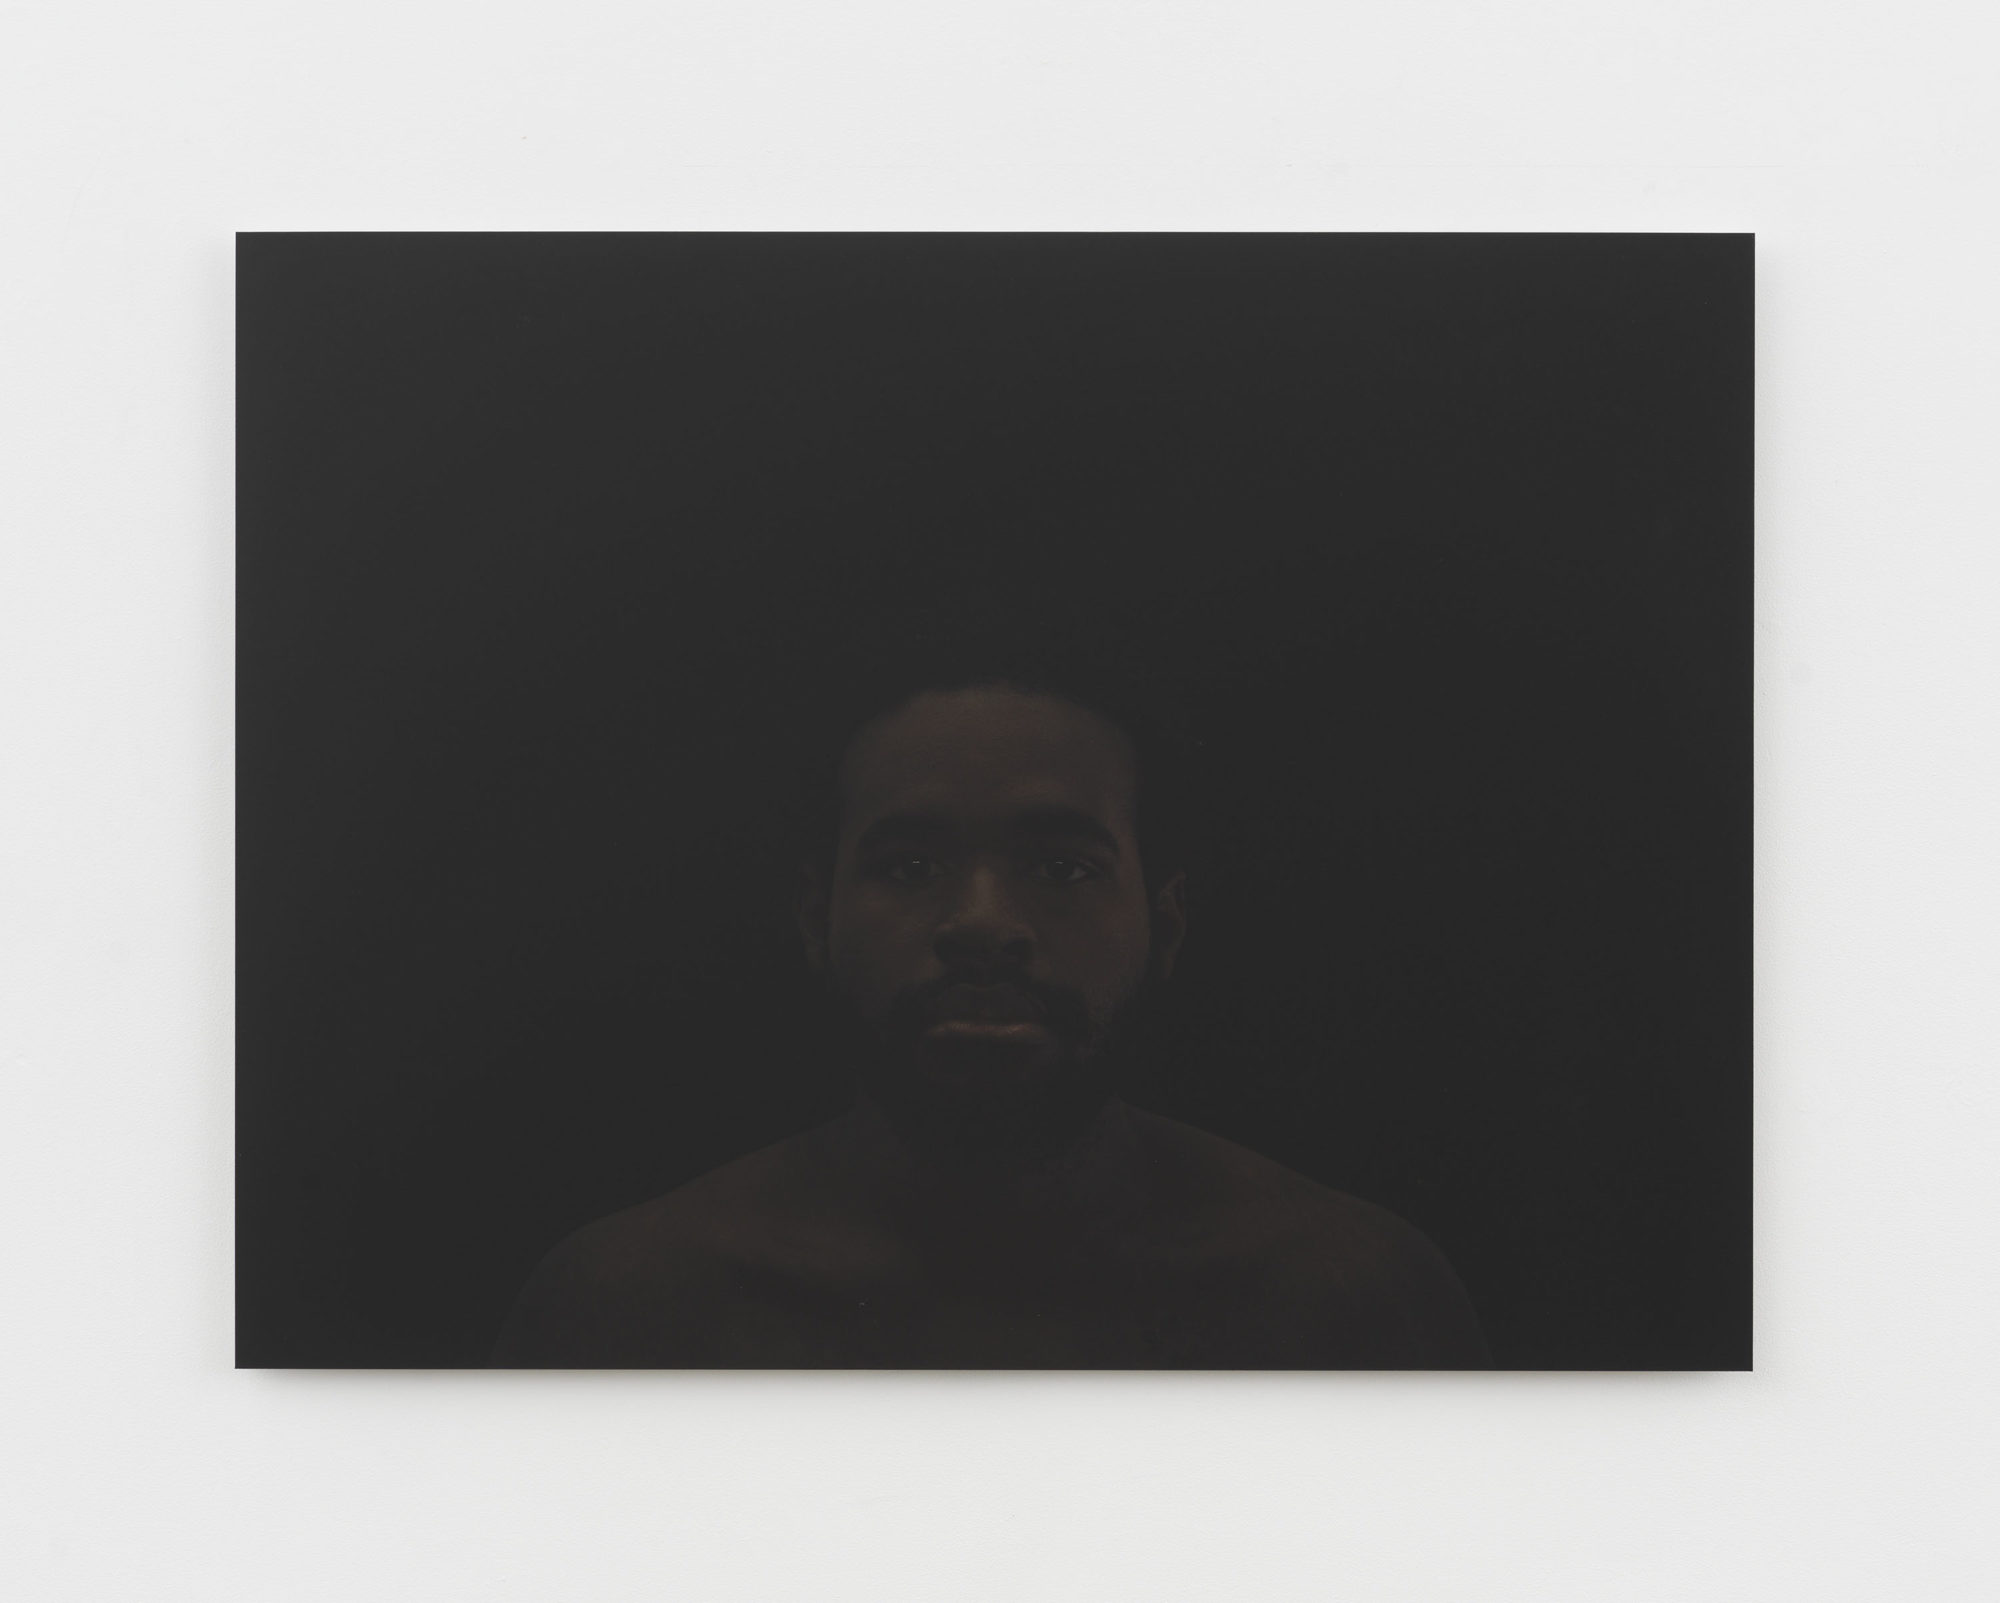 A straightforward portrait photograph of a bearded, black man in front of a black background